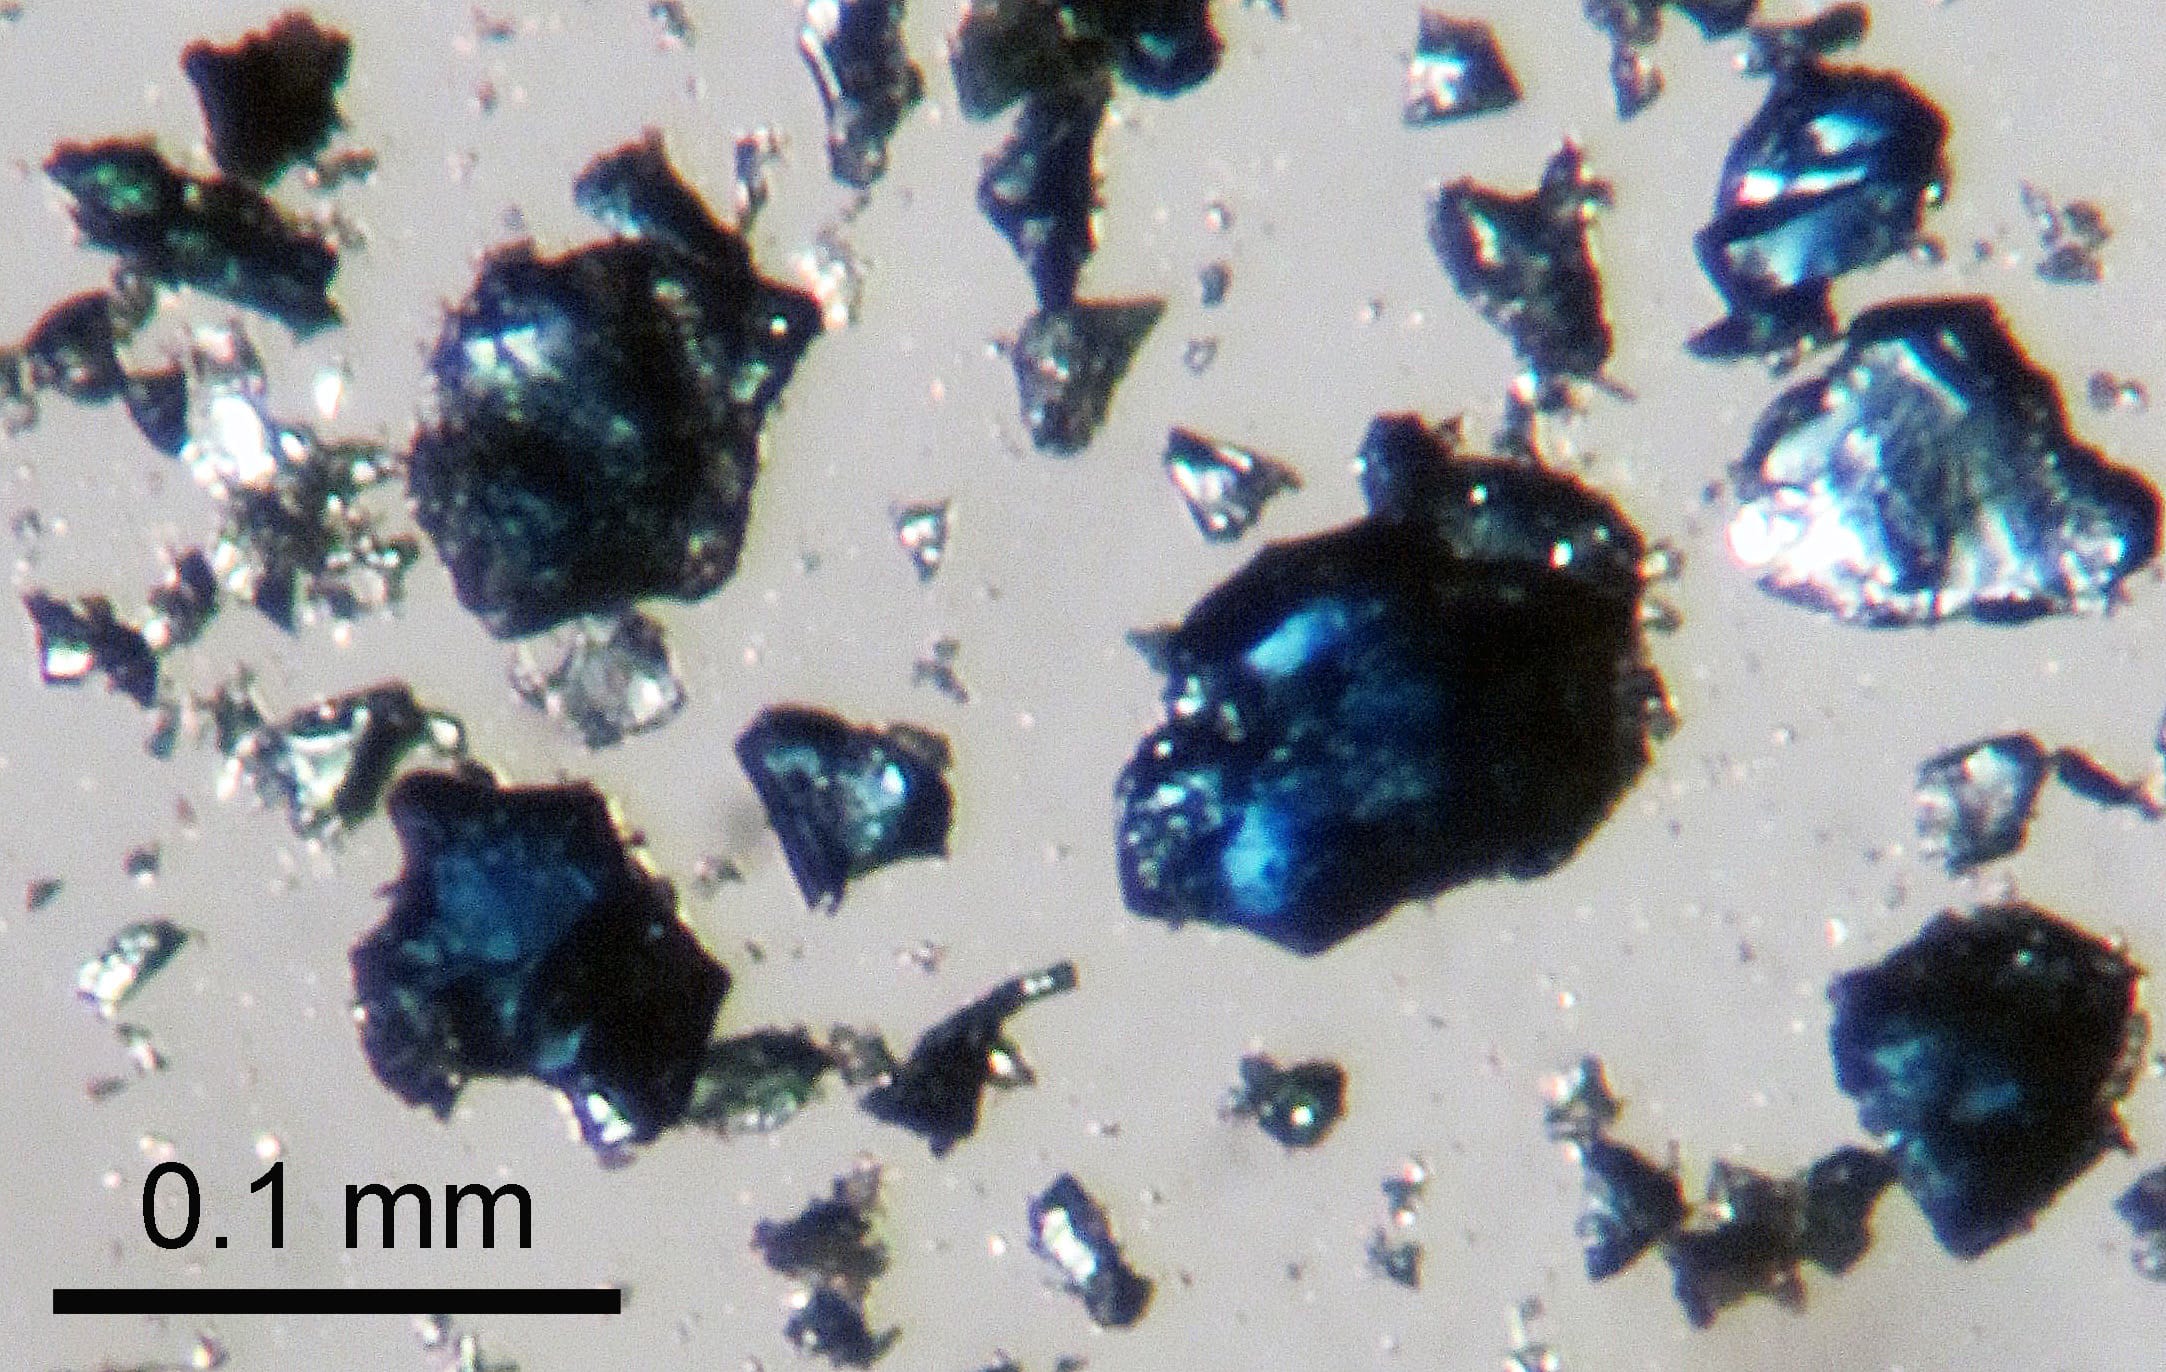 Steve Jacobsen/Northwestern University
Crystals of blue hydrous ringwoodite, synthesized in a high-pressure lab experiment, were used to help identify the diamond in the Earth's mantle. The discovery may help us to better understand the mechanics of earthquakes and volcanoes.